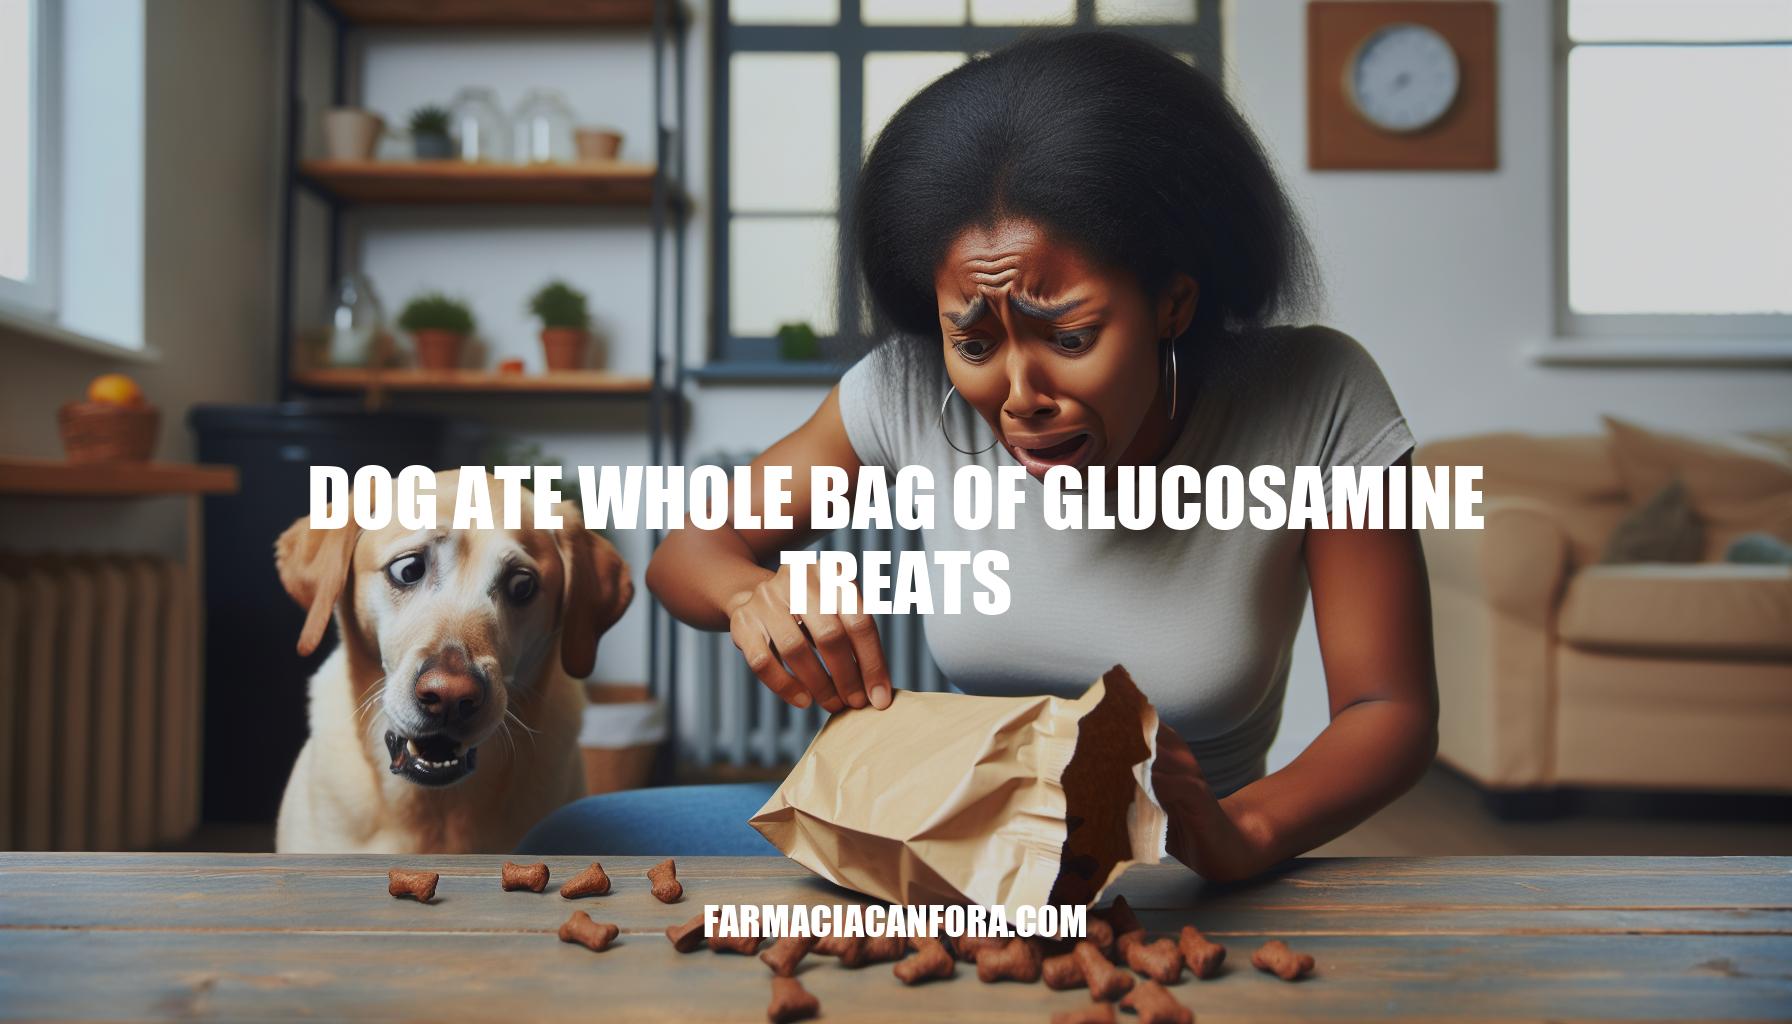 What to Do If Your Dog Ate a Whole Bag of Glucosamine Treats